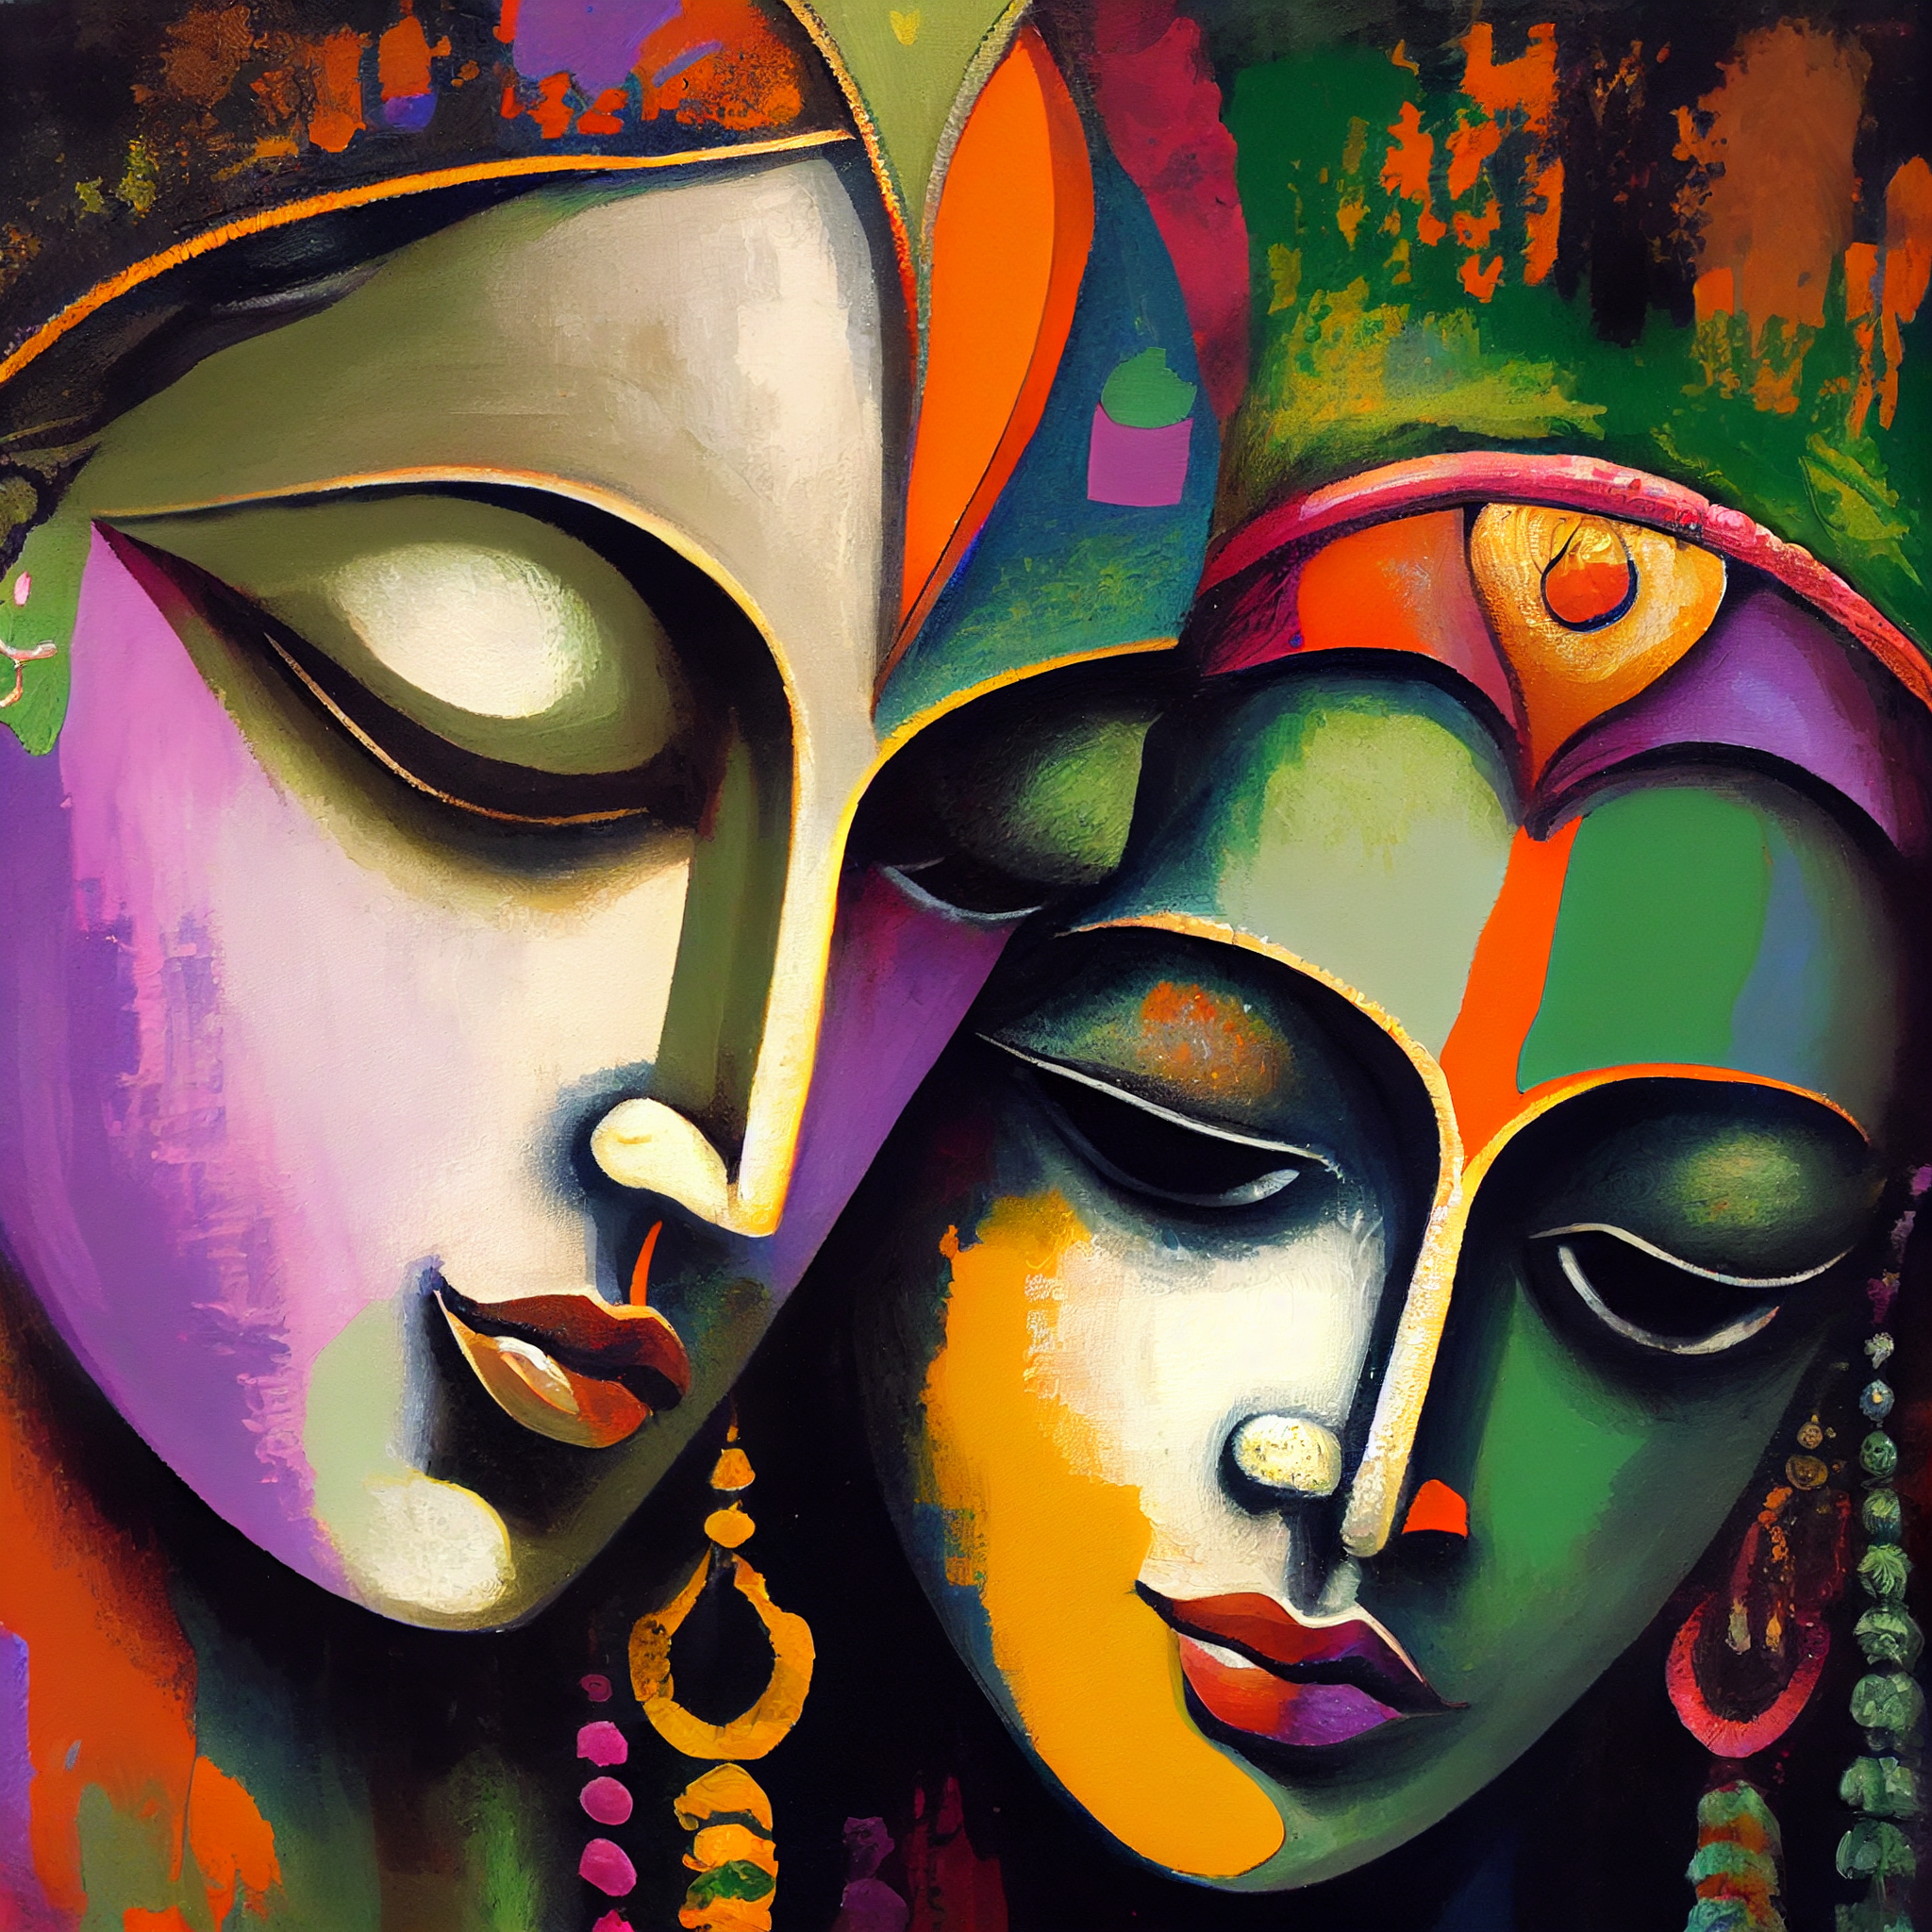 Divine Love in Vibrant Hues: A Modern Oil Painting Print of Radha Krishna in Purple, Green, Red, and Yellow